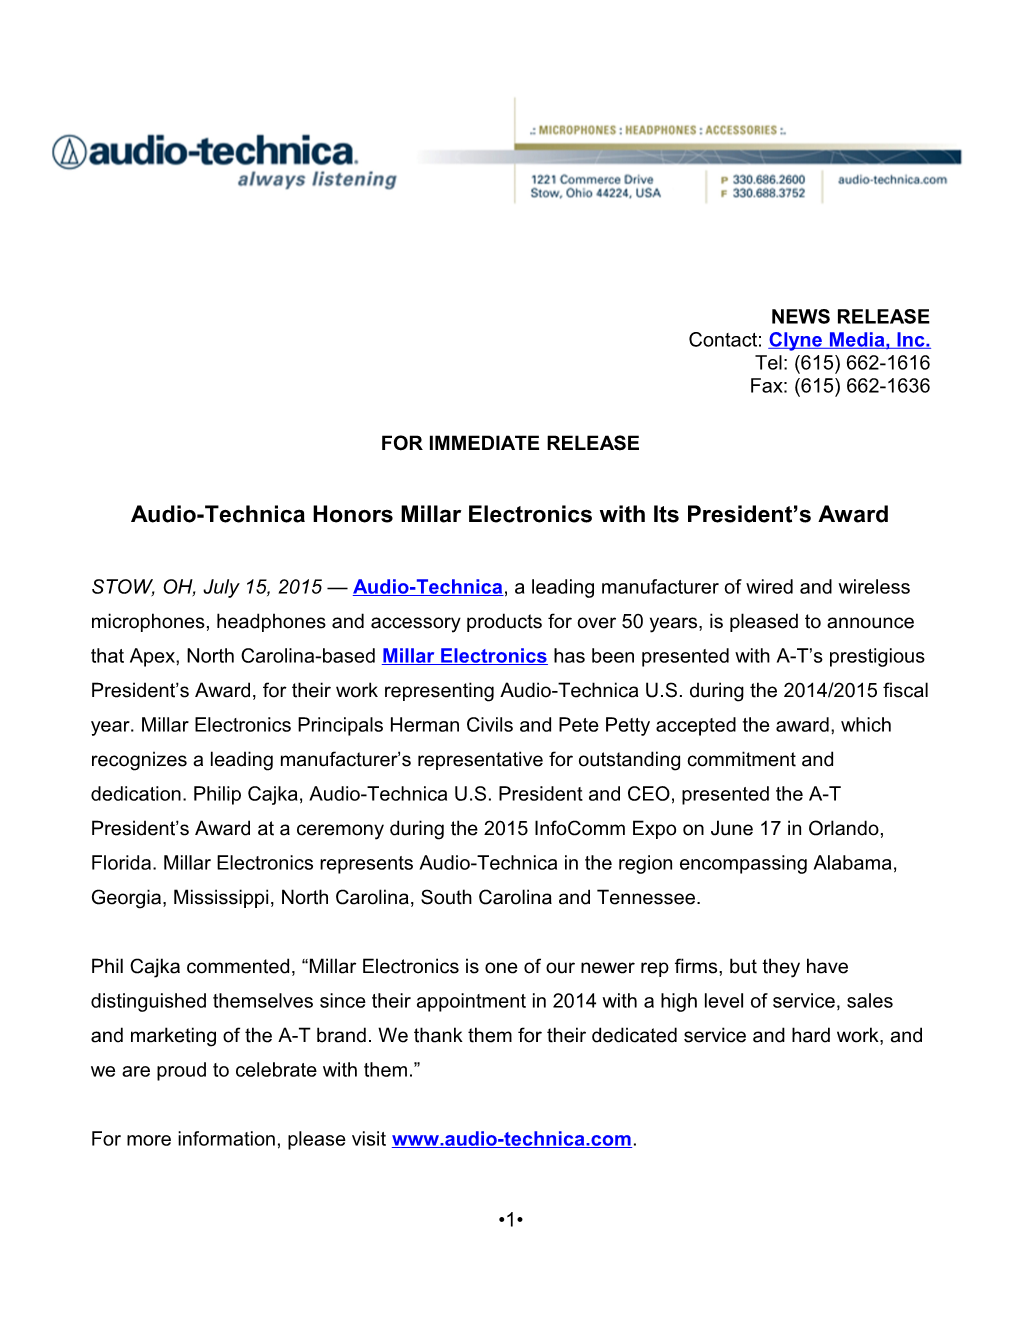 Audio-Technica Honors Millar Electronics with Its President S Award